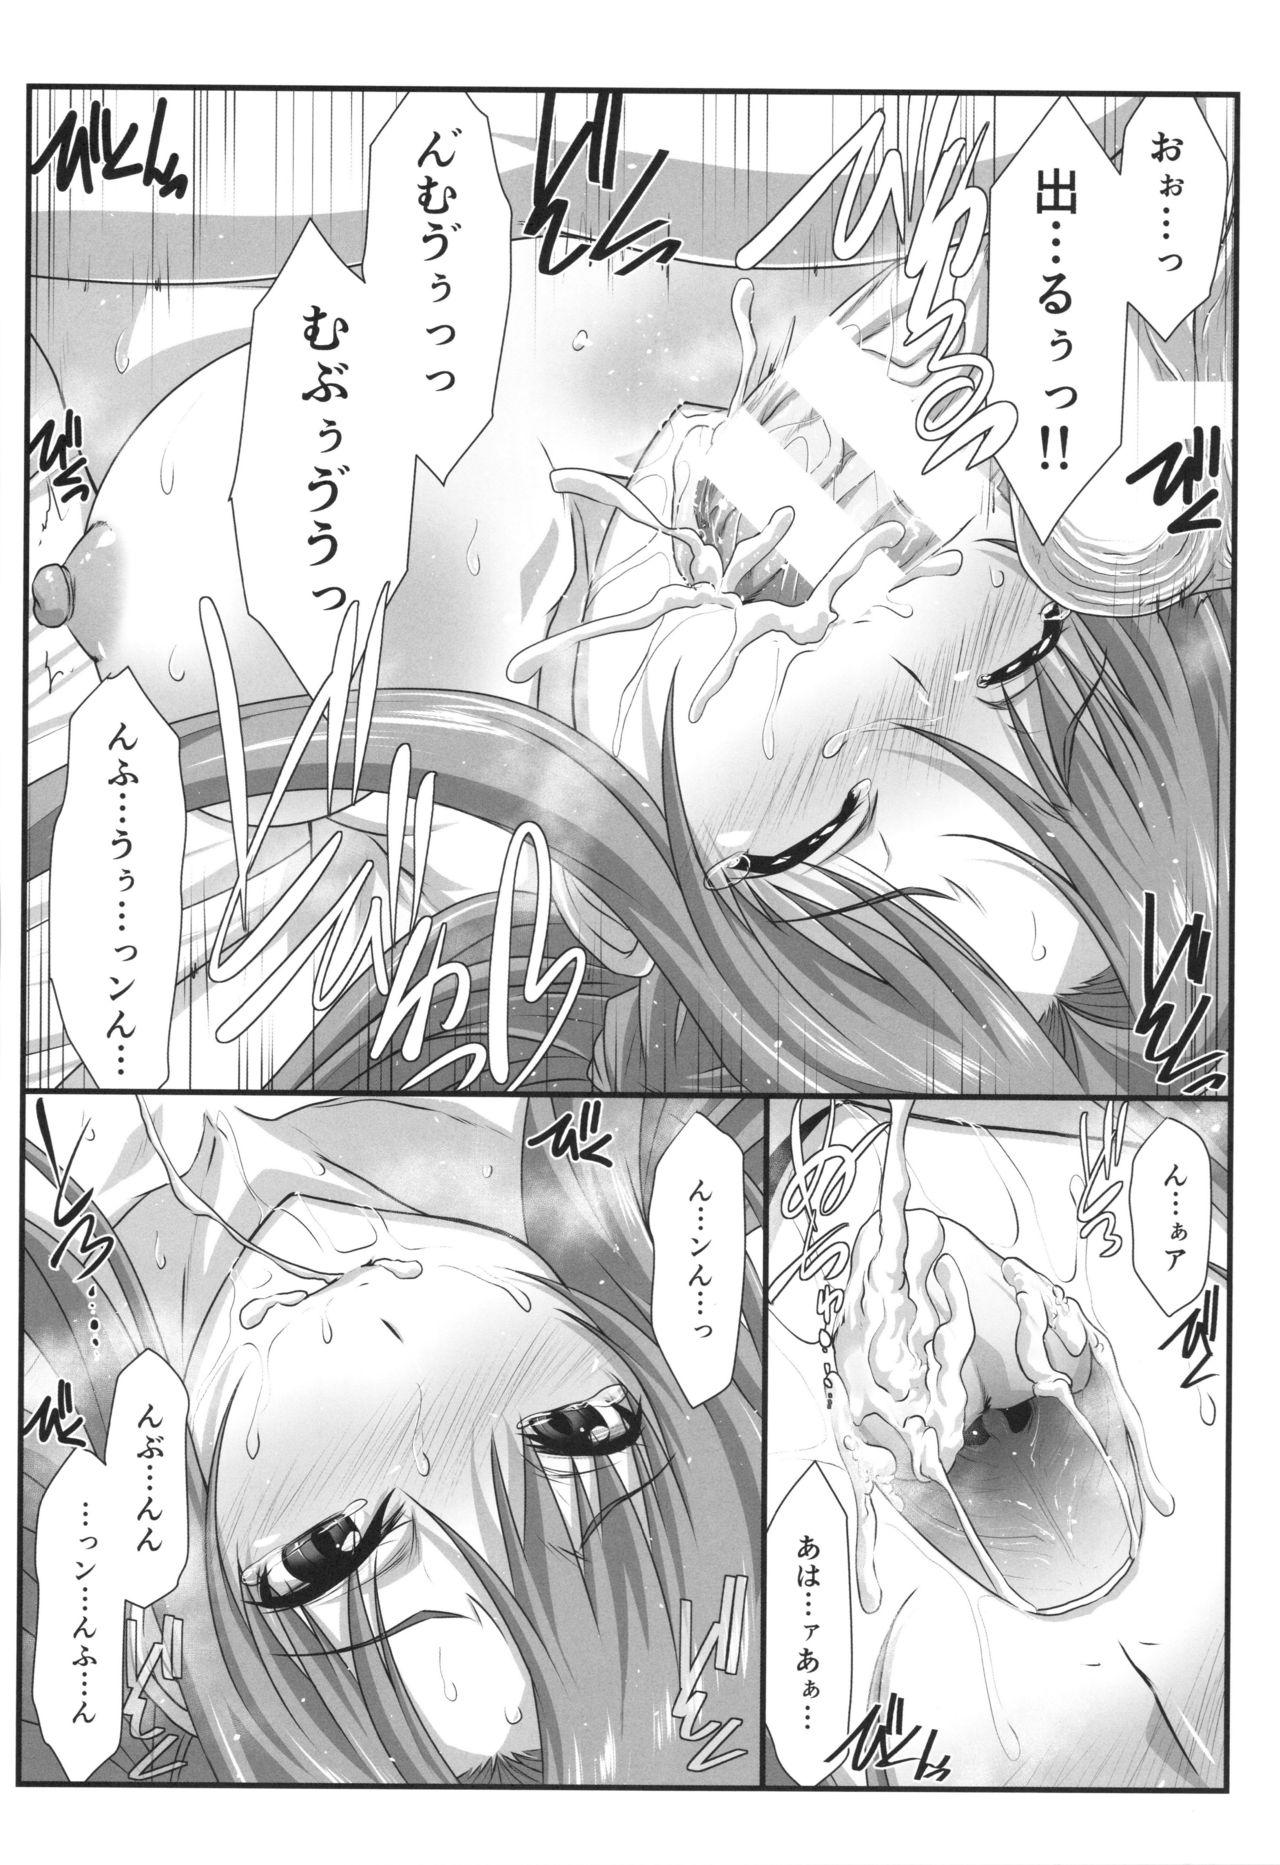 Stripping Astral Bout Ver. 41 - Sword art online Cfnm - Page 9